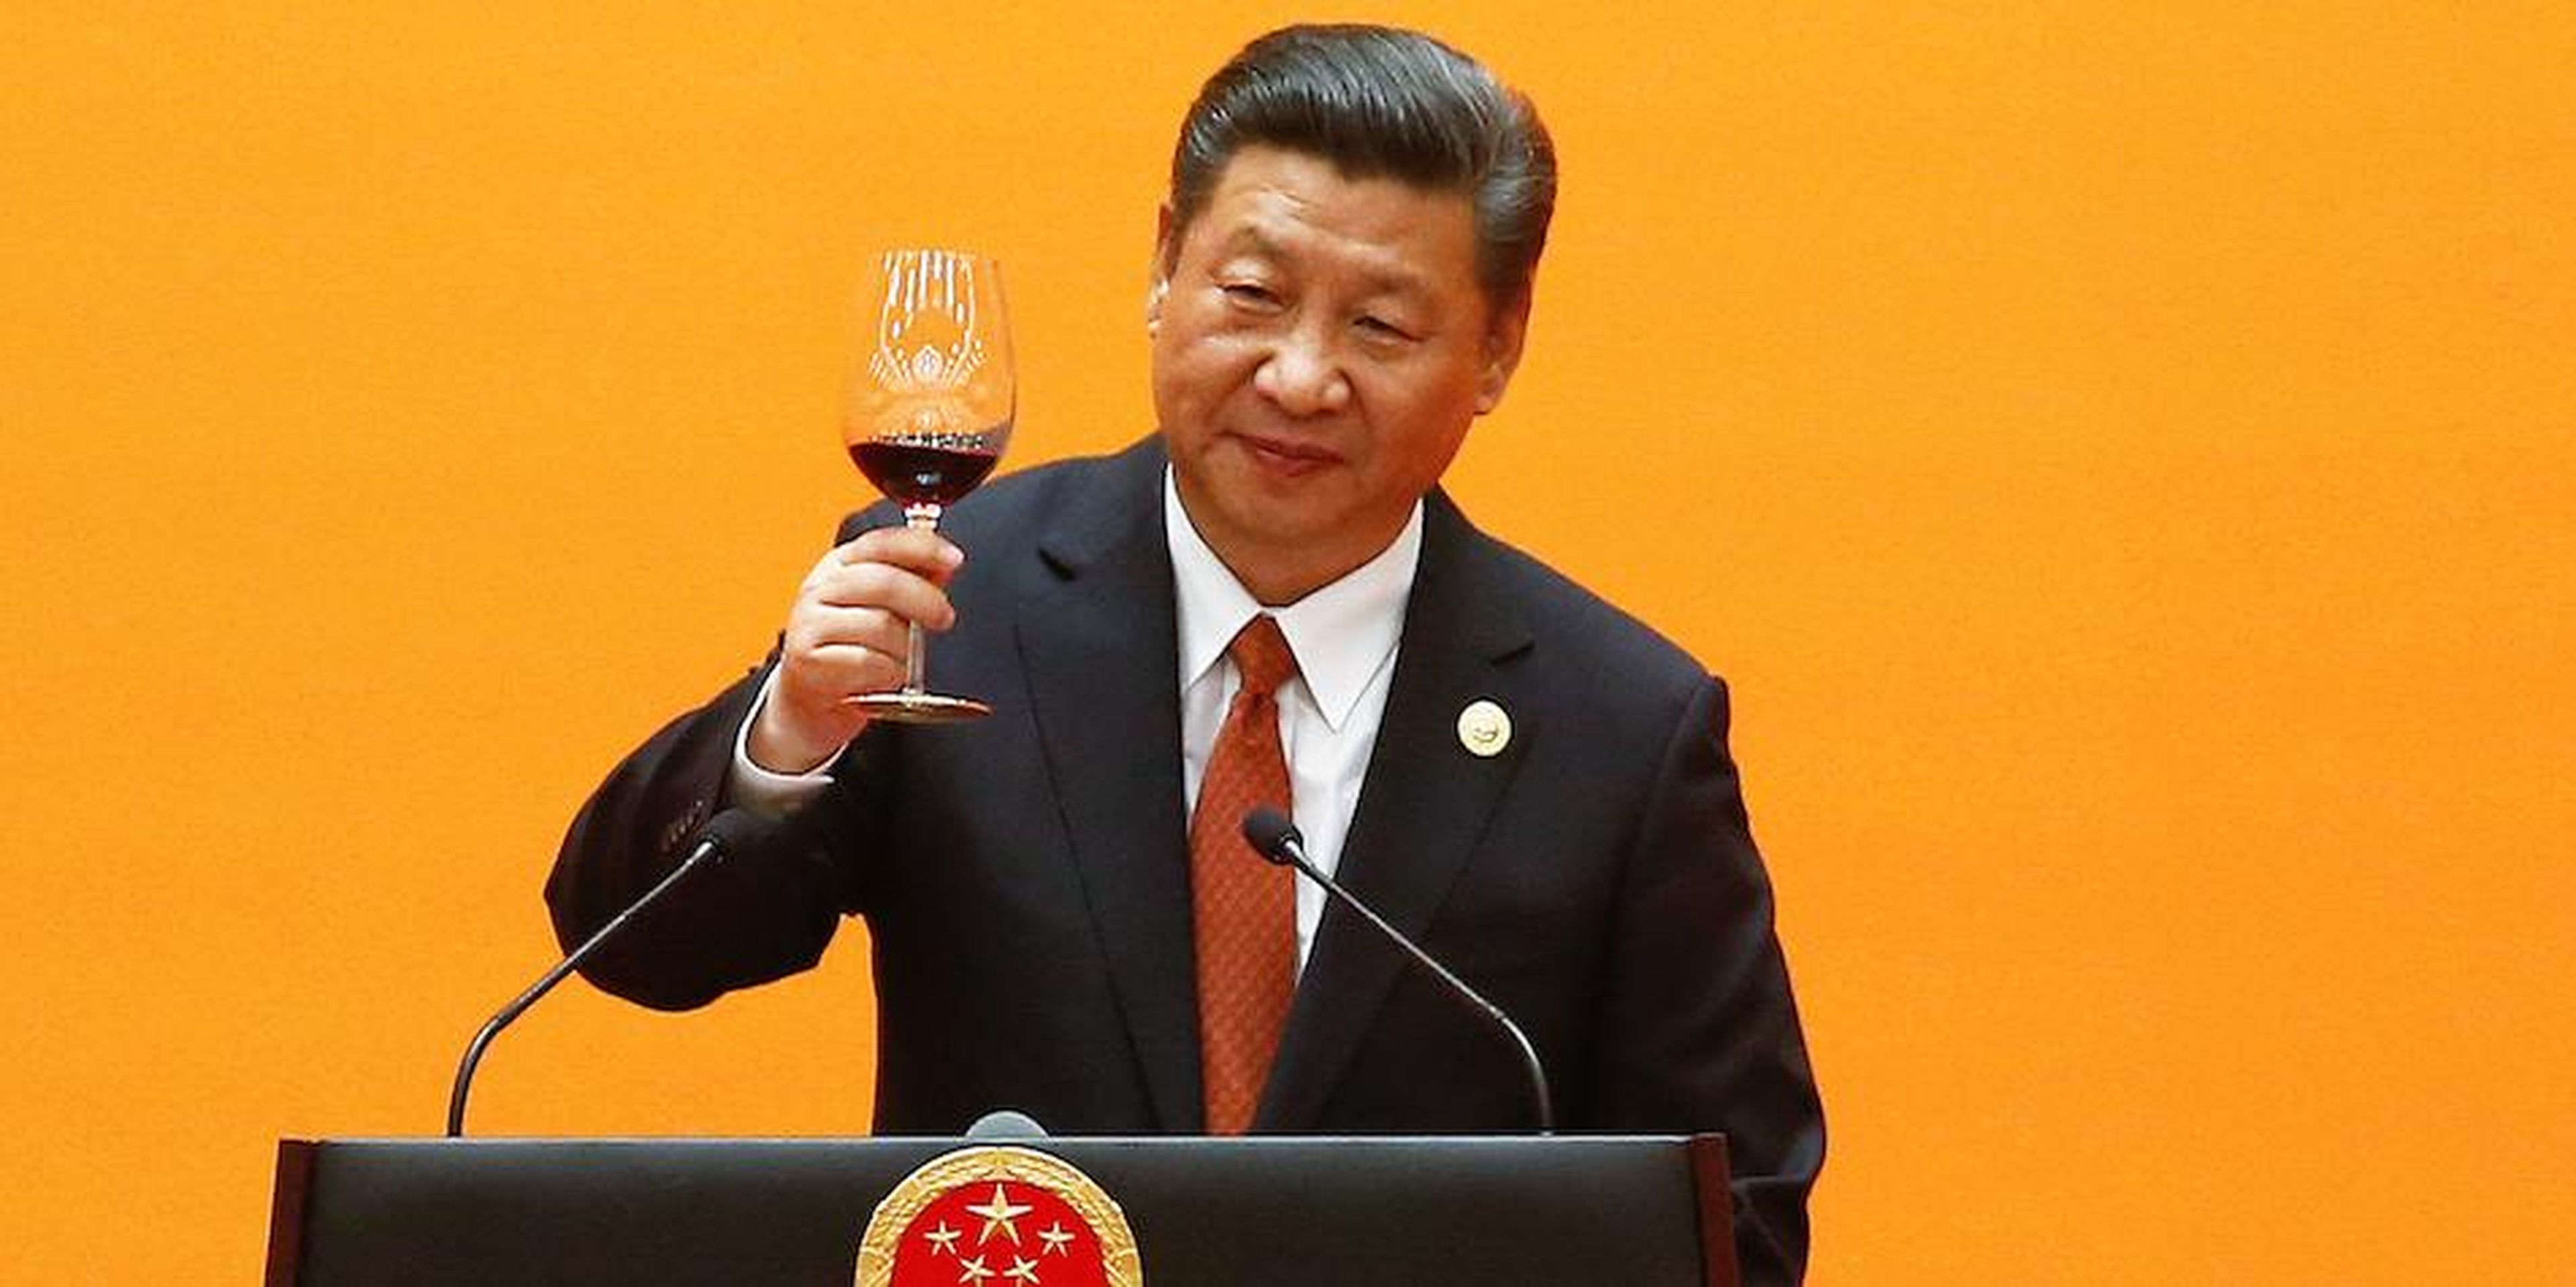 Chinese President Xi Jinping makes a toast in Beijing in May 2017. Under his rule, the Chinese Communist Party has pushed out a social credit system that aims to reward and punish citizens according to their behavior.